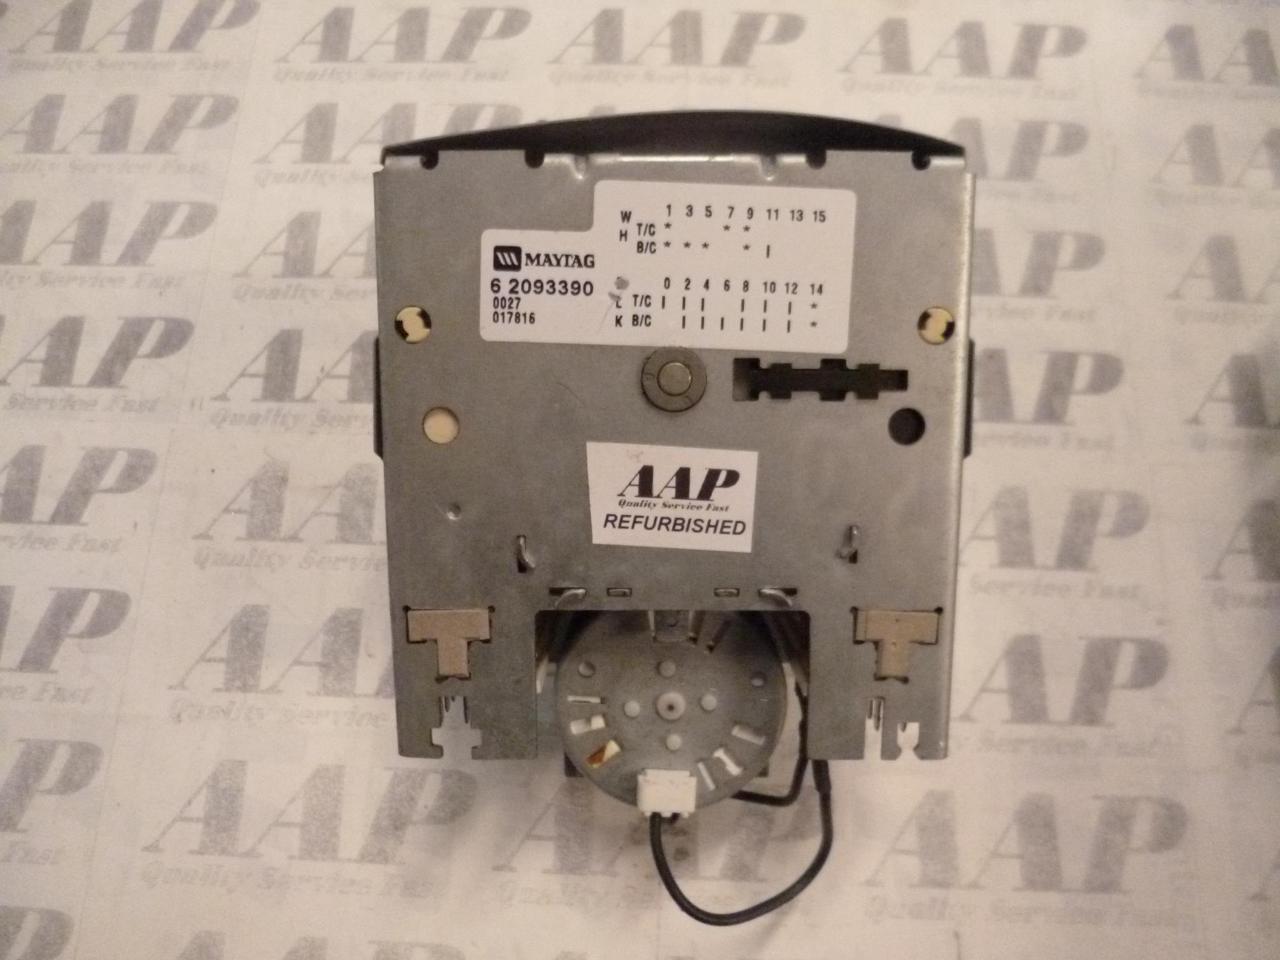 Details about   6 2701660 AAP REFURBISHED Maytag Washer Timer LIFETIME Guarantee 2-3 Day Deliver 